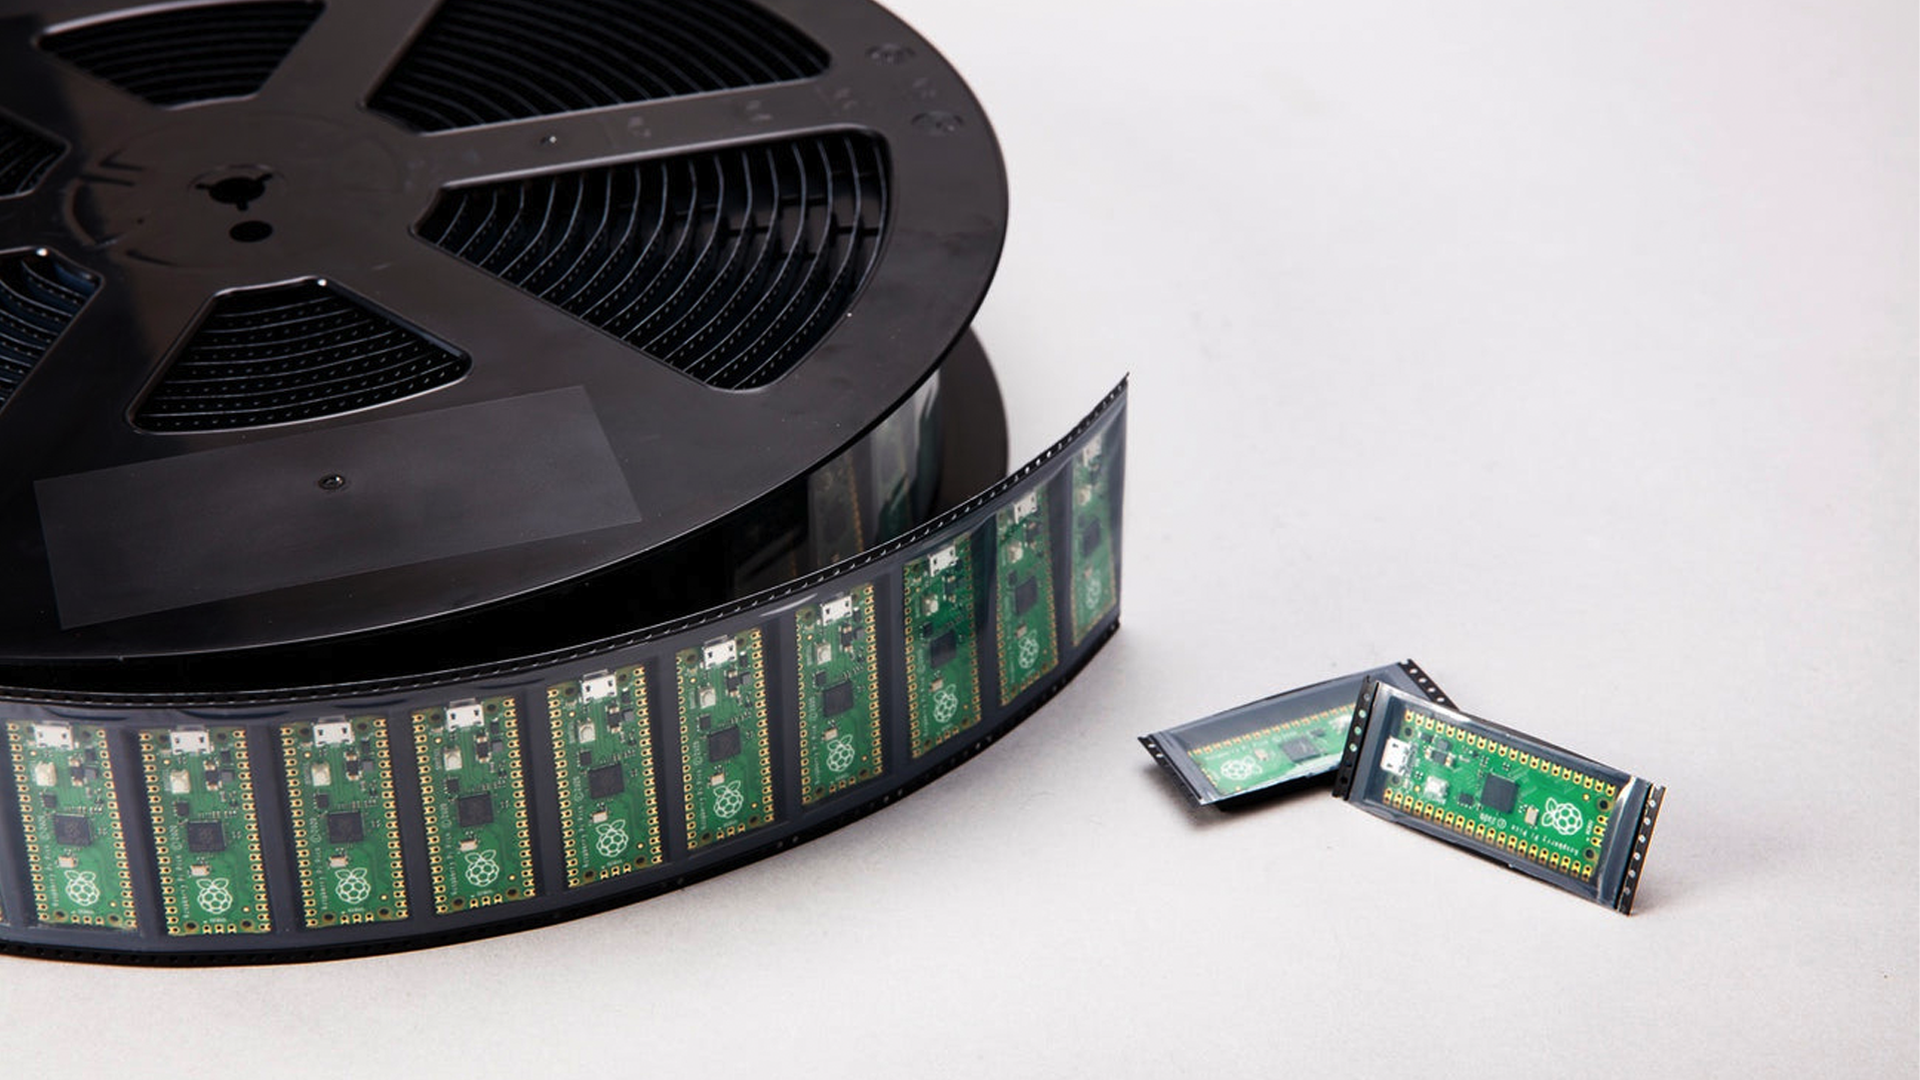 Why Buy 1 Raspberry Pi Pico When You Can Buy 480 On a Film Reel? – Review Geek